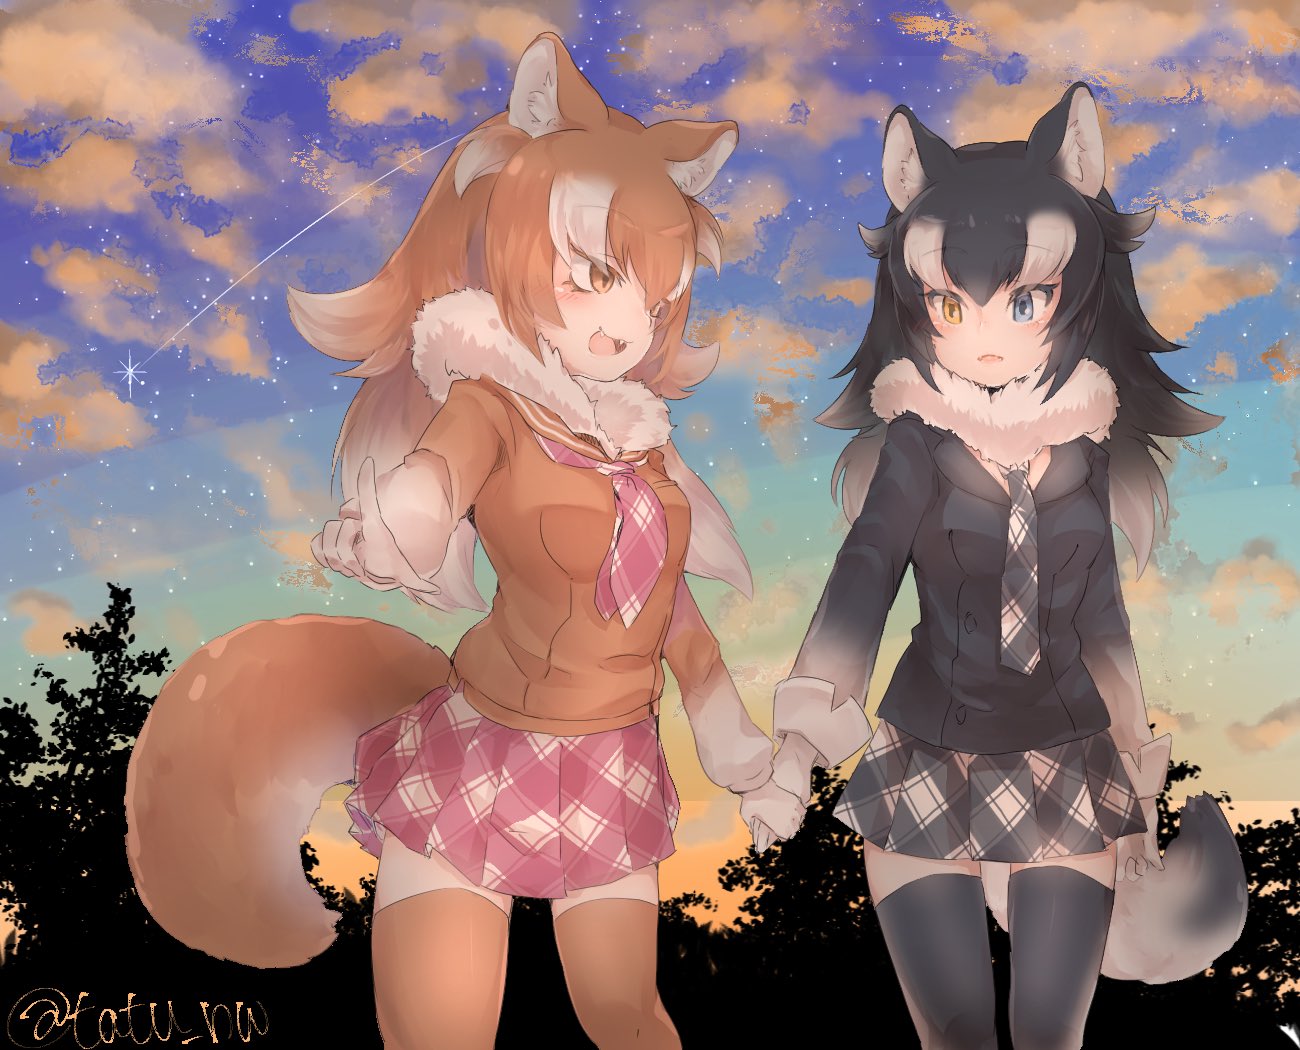 2girls animal_ears blue_eyes commentary_request fangs fur_collar gloves grey_wolf_(kemono_friends) hand_holding heterochromia japanese_wolf_(kemono_friends) kemono_friends long_hair multicolored_hair multiple_girls neckerchief necktie open_mouth pleated_skirt pointing shooting_star skirt tail tatsuno_newo thigh-highs twilight wolf_ears wolf_tail yellow_eyes zettai_ryouiki